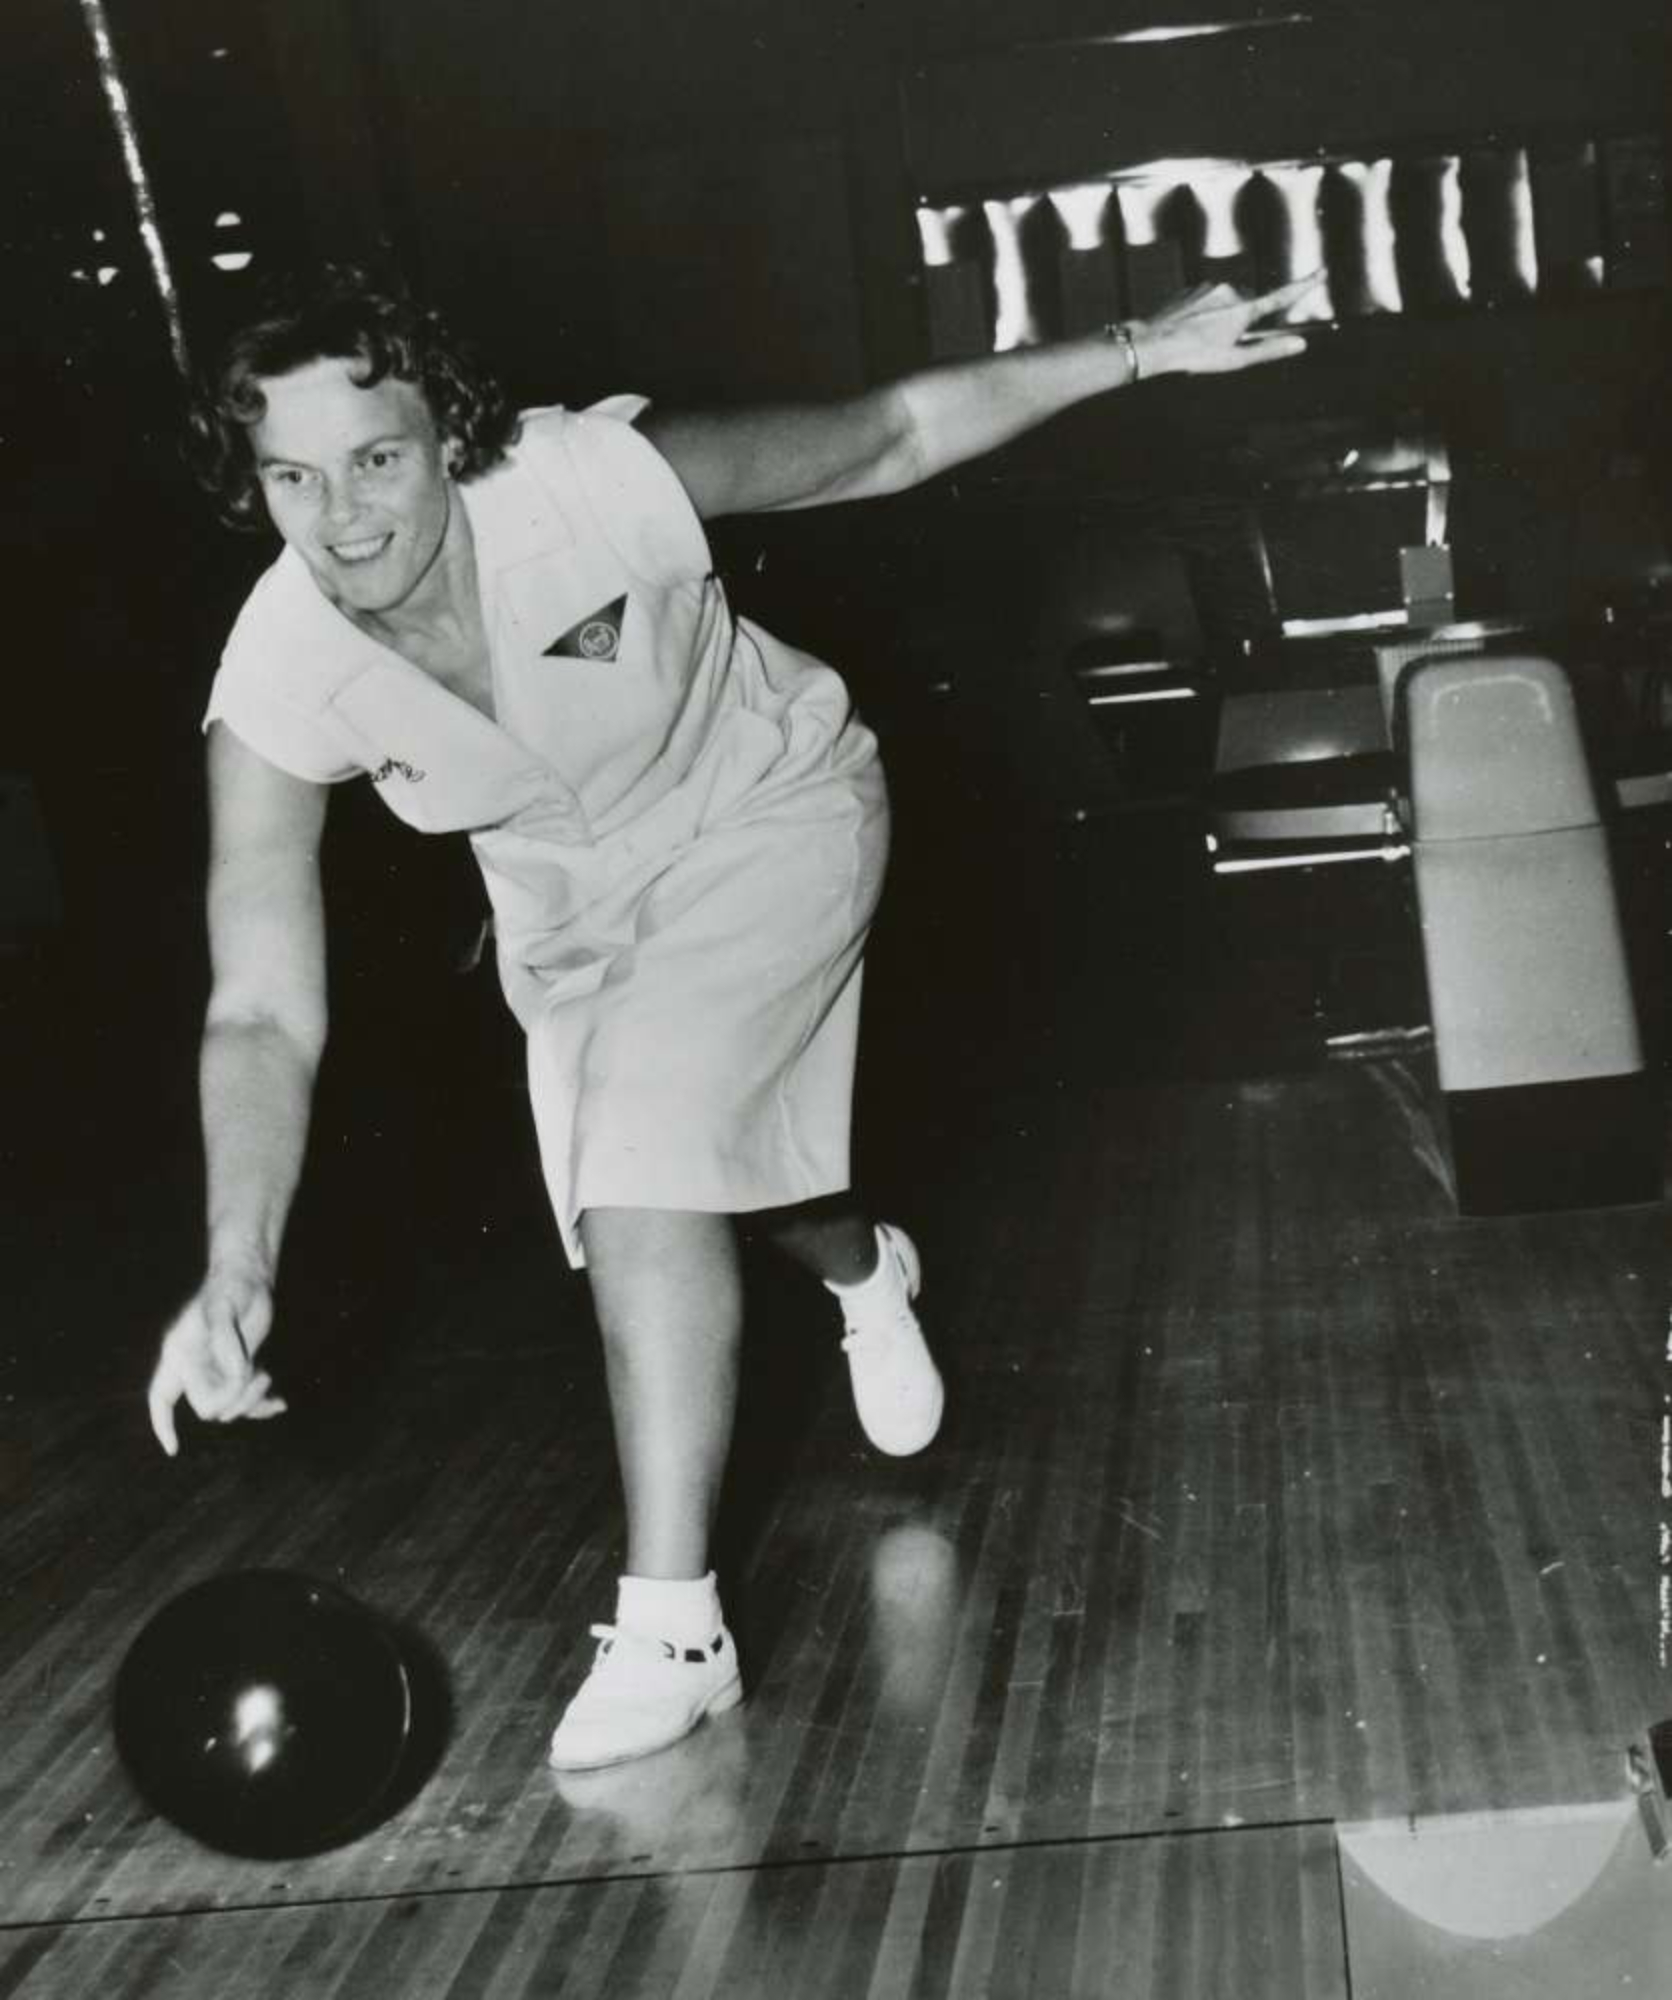 USBC HALL OF FAMER JEANETTE ROBINSON DIES AT AGE 94